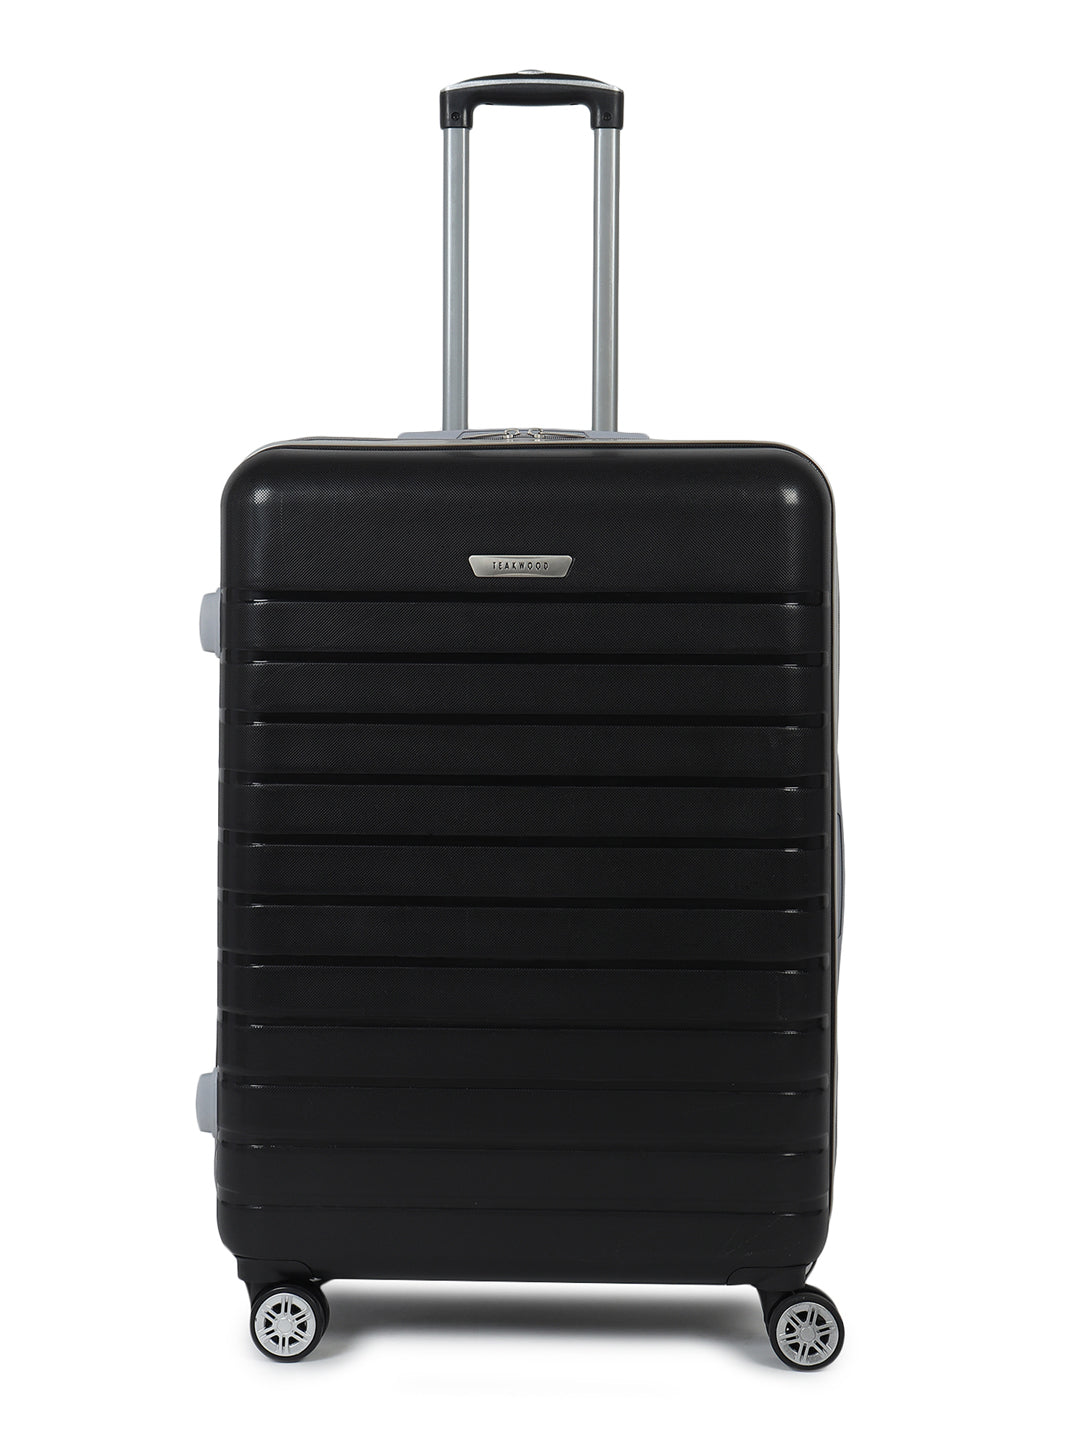 Unisex Black Textured Hard Sided Large Size Check-In Trolley Bag